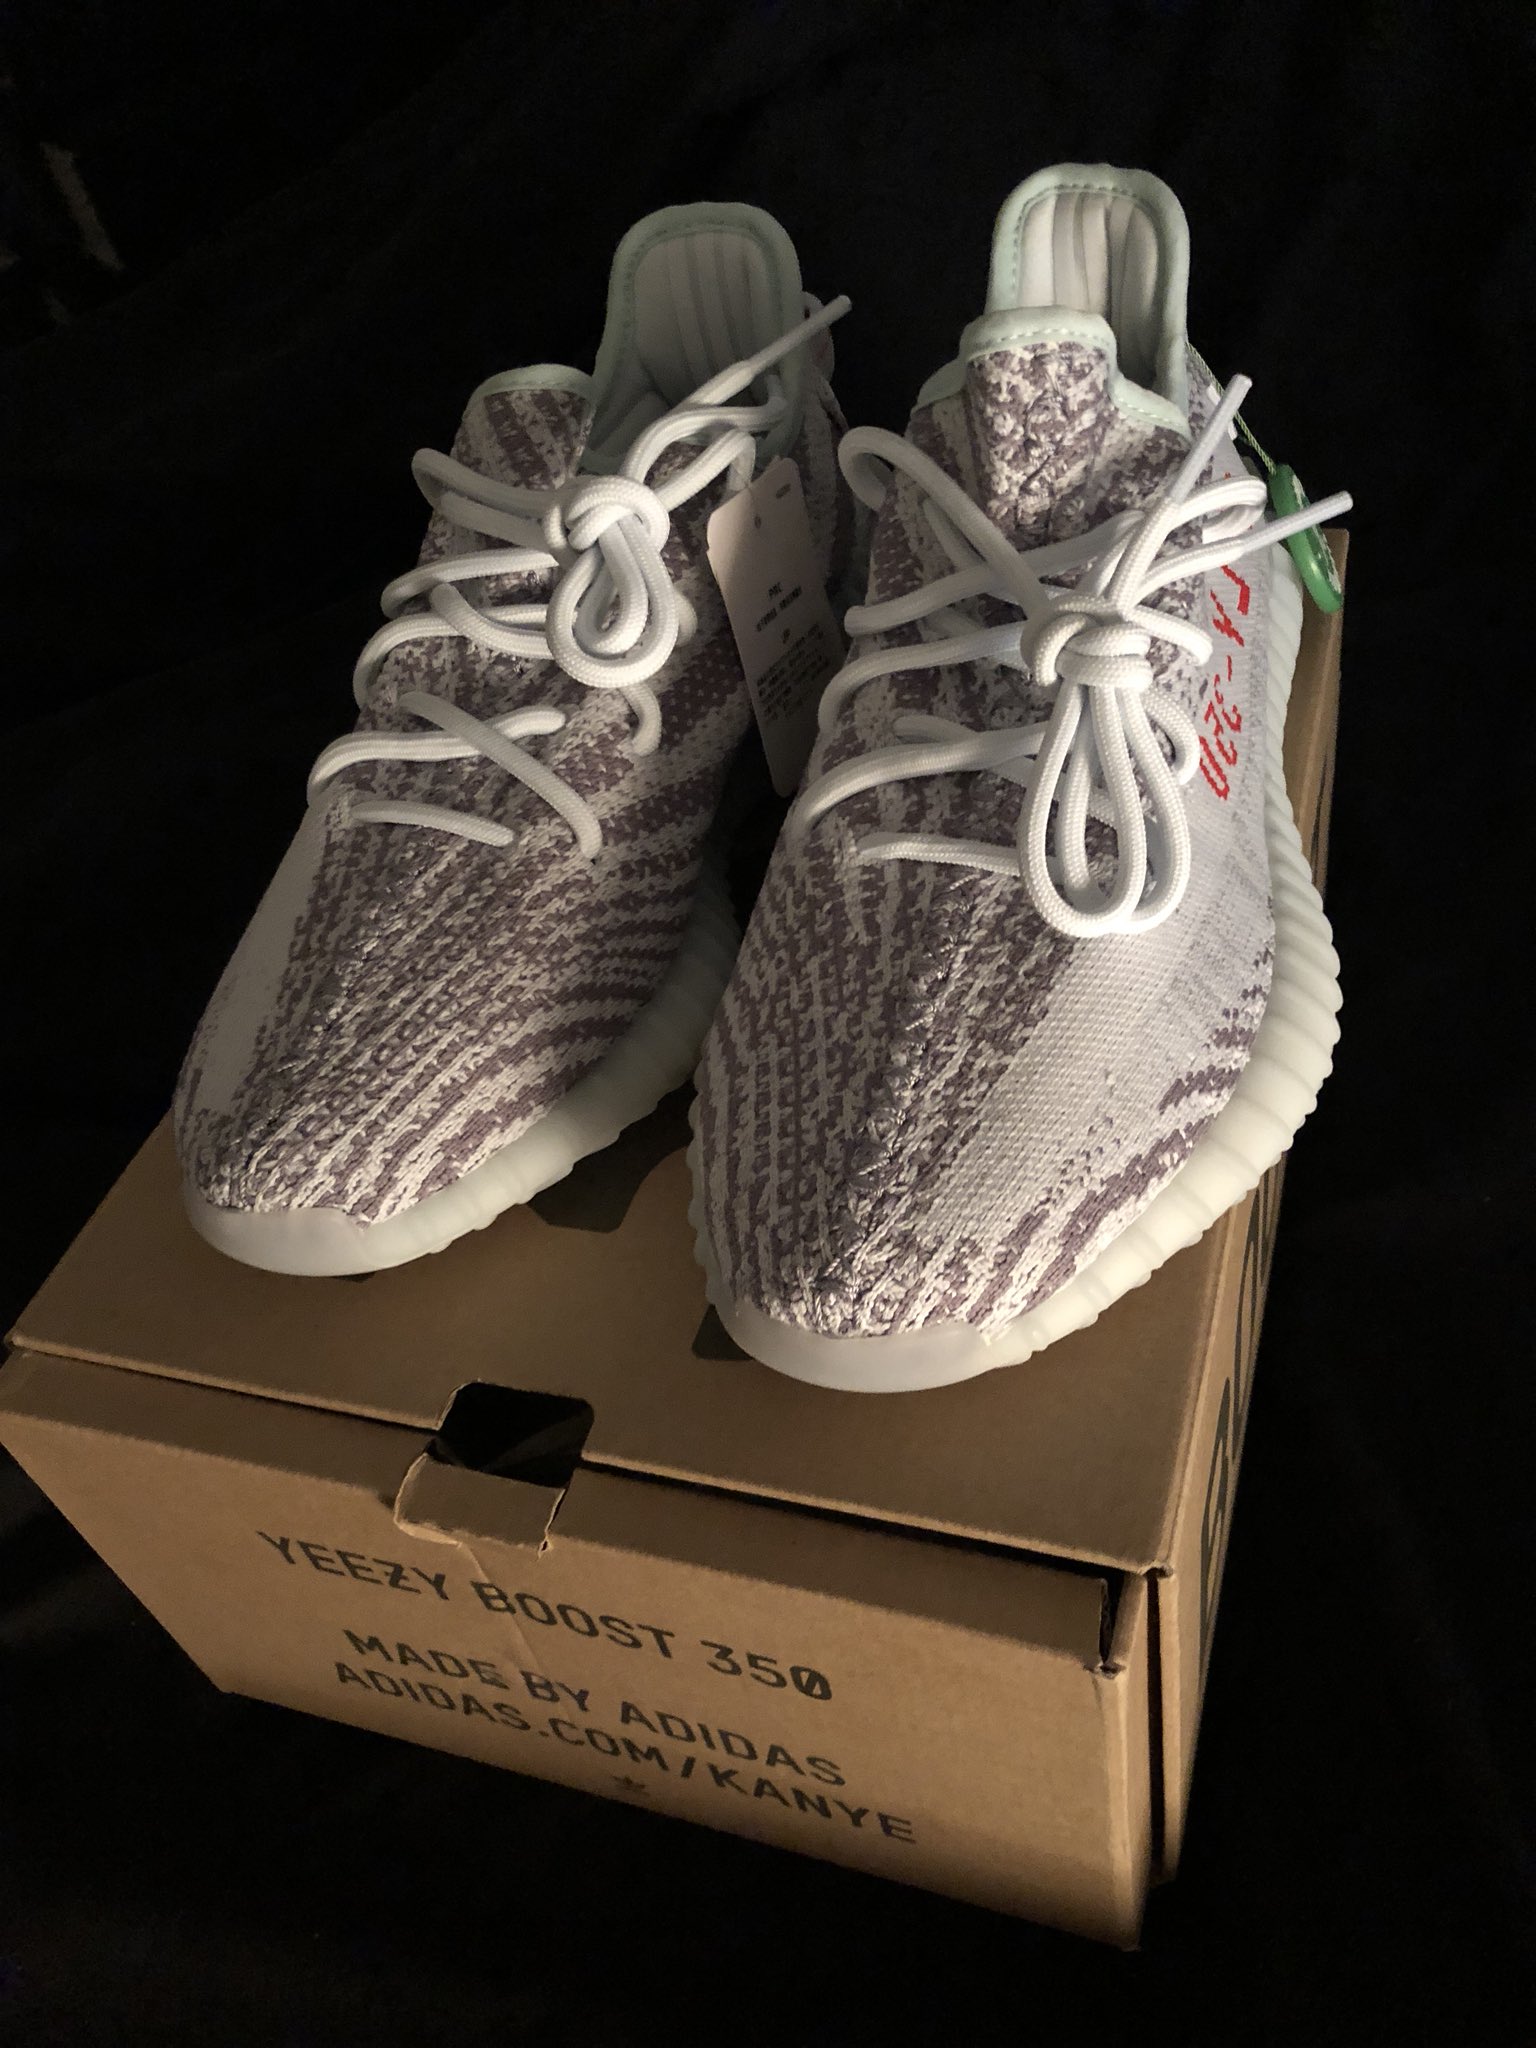 Modsigelse lov fejl Michael on Twitter: "DS Yeezy Boost 350 V2 Blue Tint Size 8 StockX  Authentic Tag Still Attached $360 shipped. PayPal Only.  https://t.co/p081PSvrJX" / X